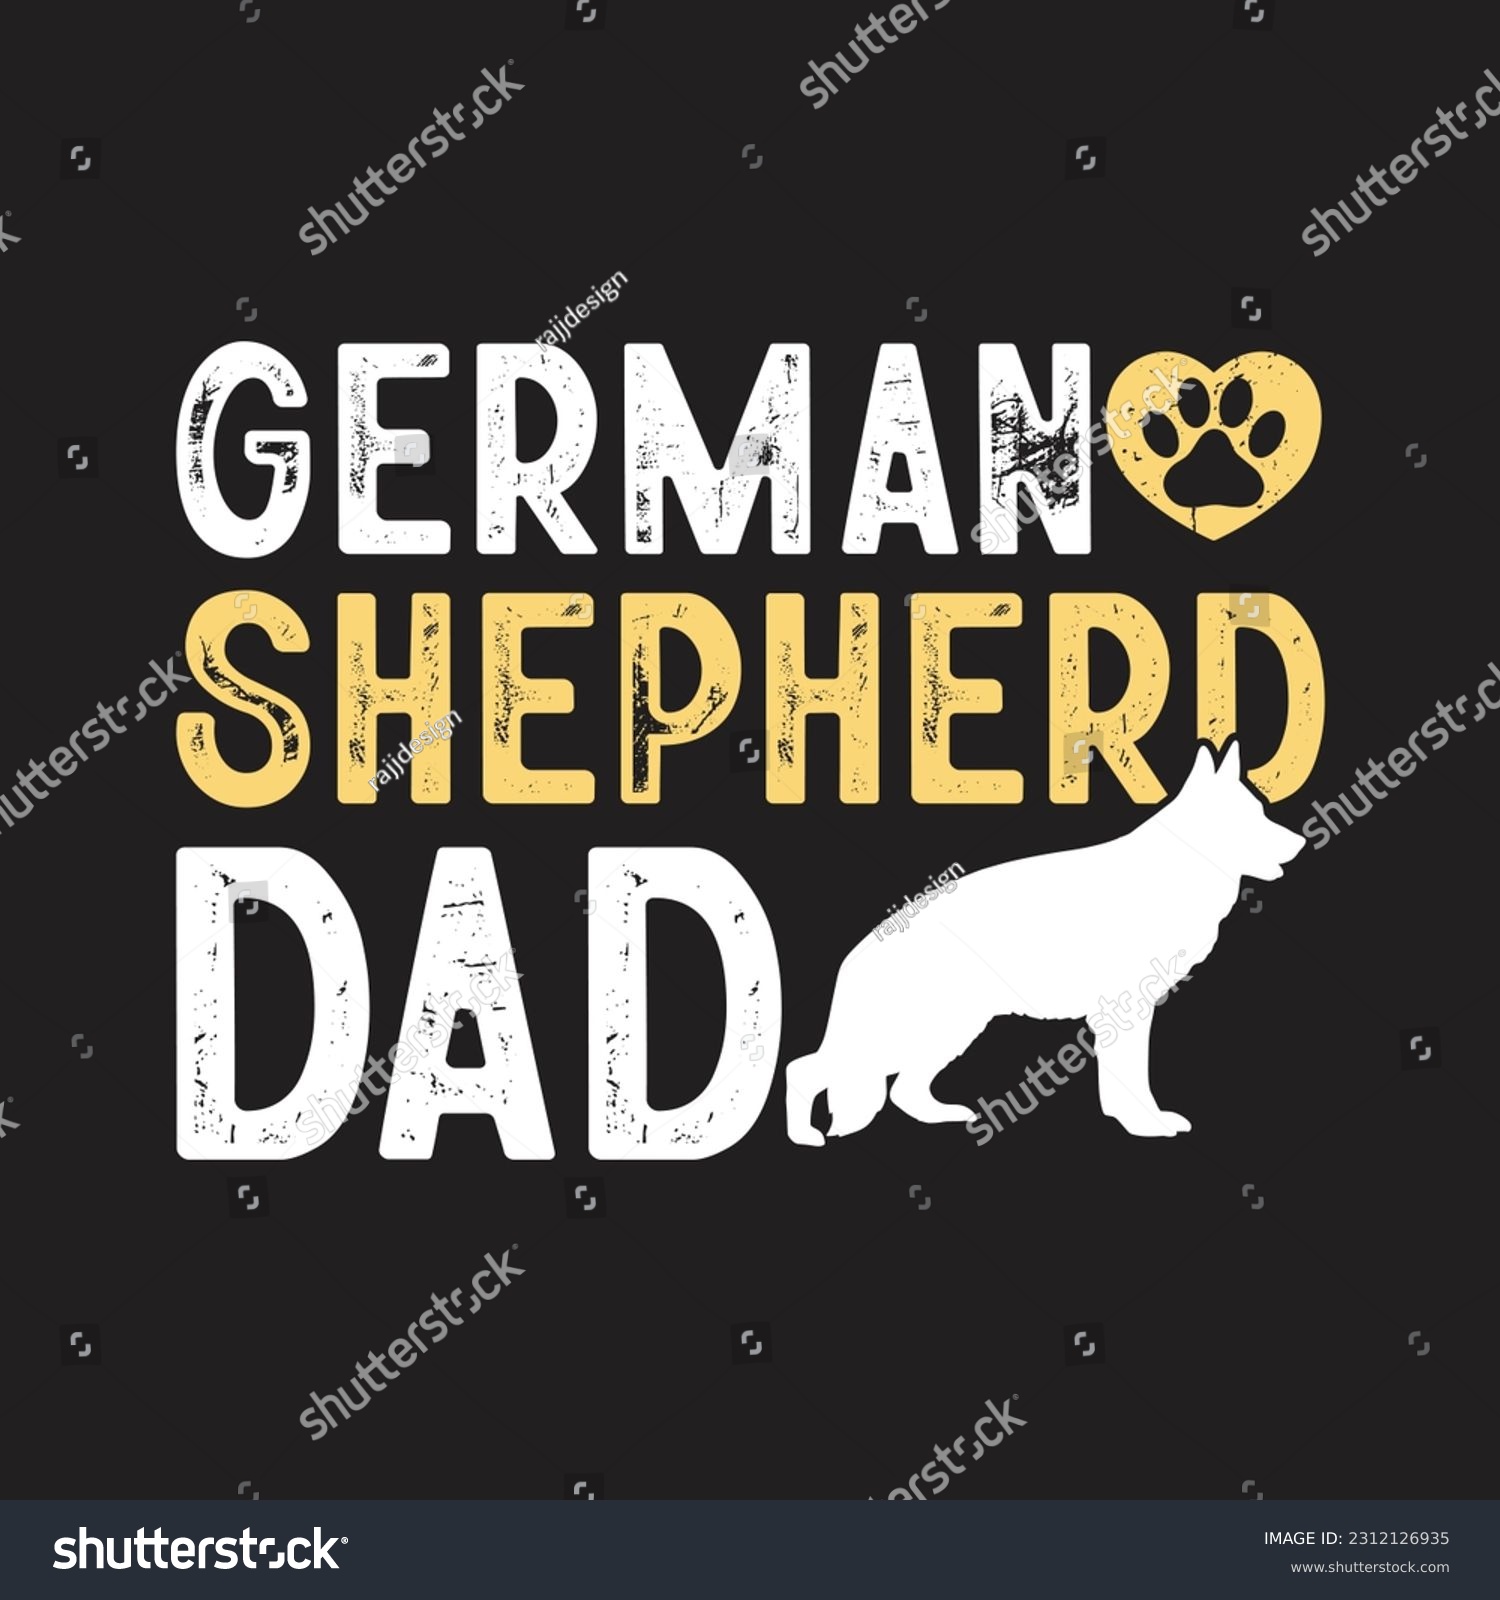 SVG of German Shepherd Dad T-Shirt Design, Posters, Greeting Cards, Textiles, and Sticker Vector Illustration svg